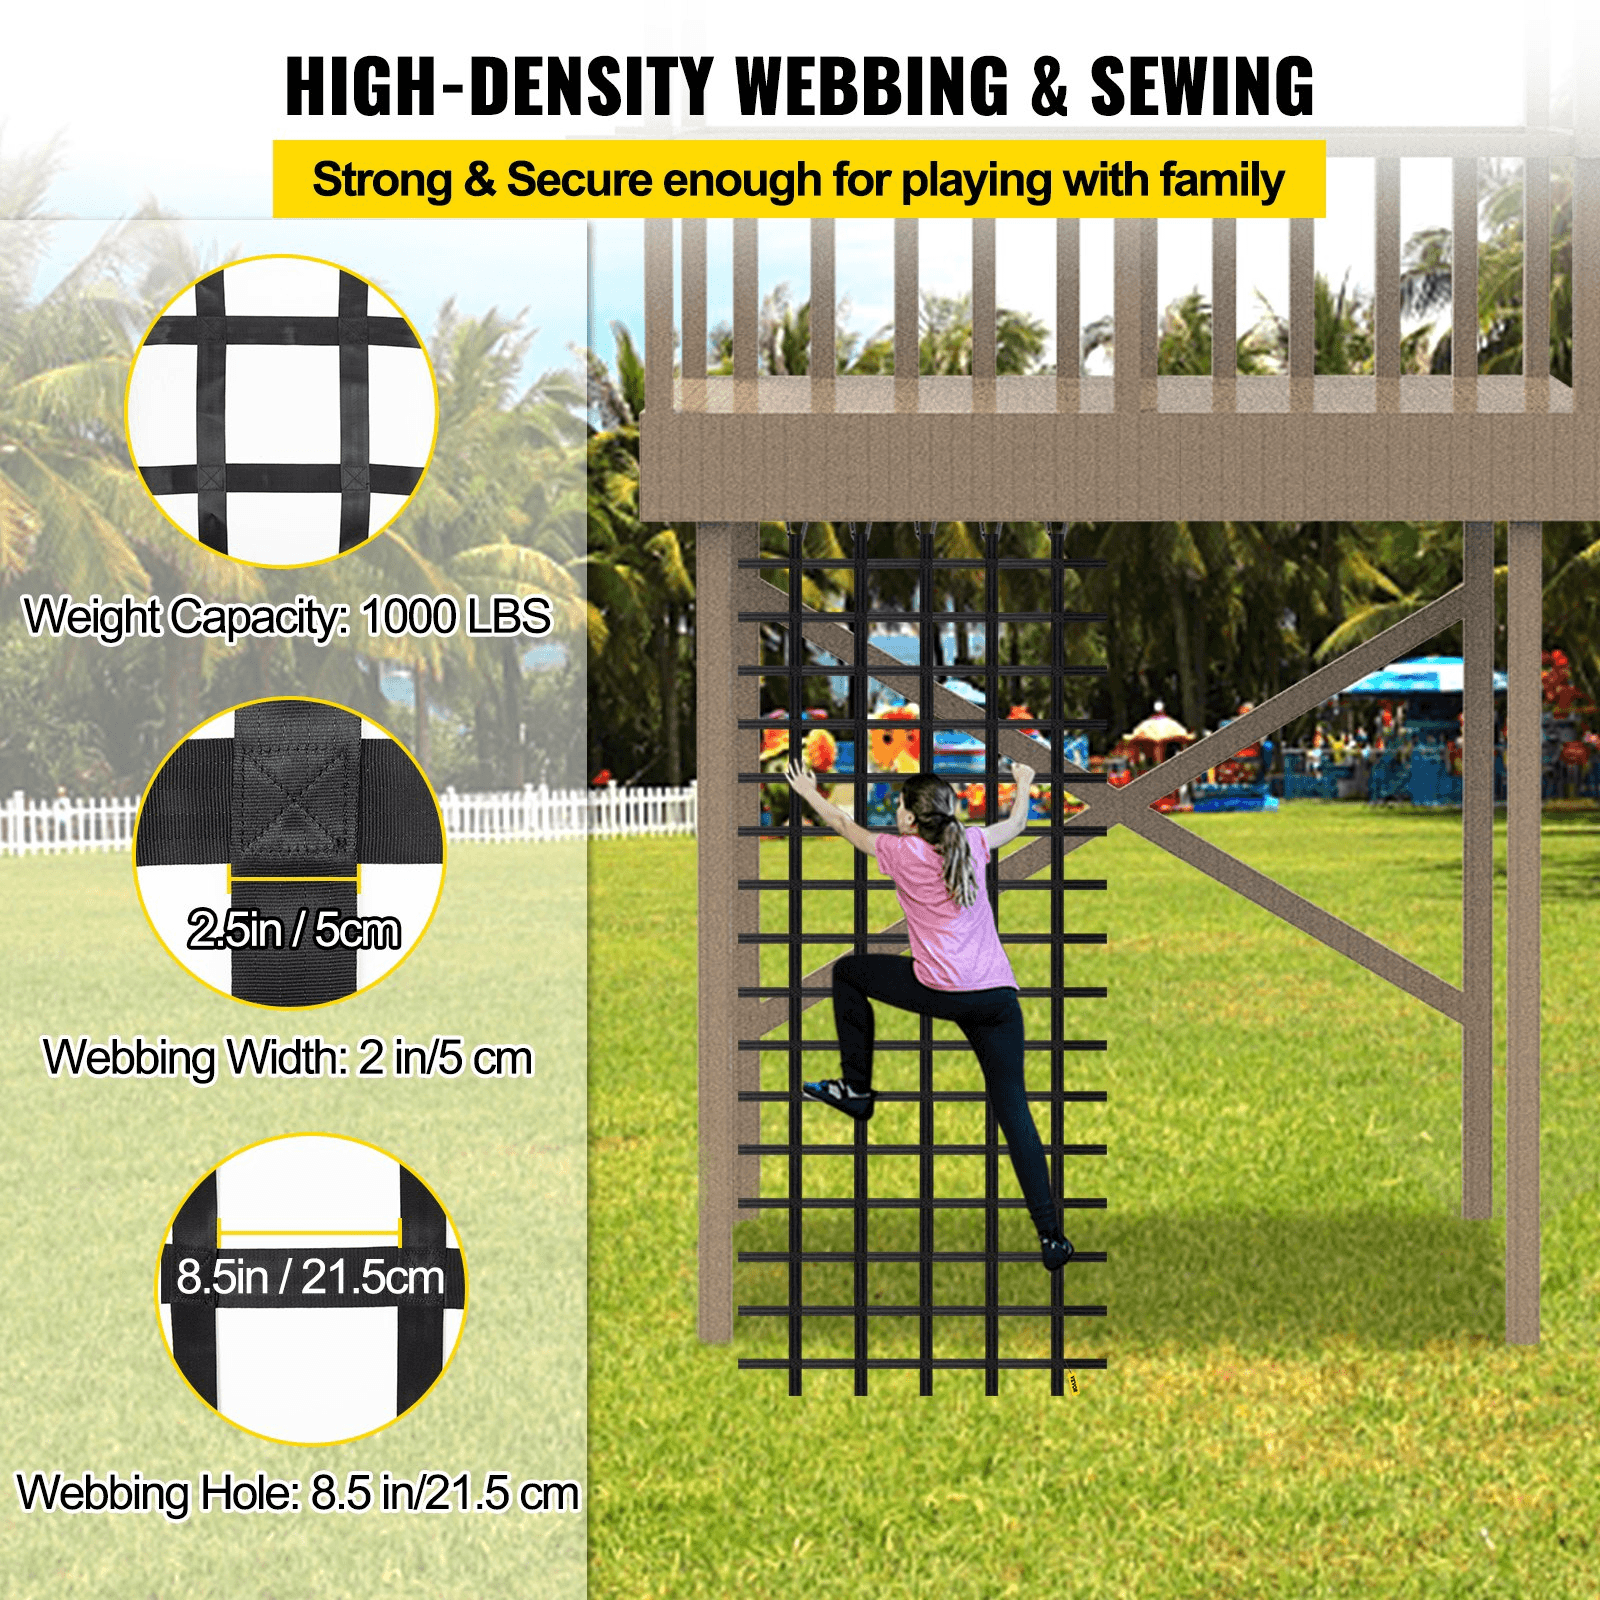 VEVOR Climbing Cargo Net, 12' x 4' Playground Climbing Net, Polyester Material, Rope Ladder, Swingset, Large Military Climbing Cargo Net for Kids & Adult, Indoor & Outdoor, Treehouse, Jungle Gyms - Loomini